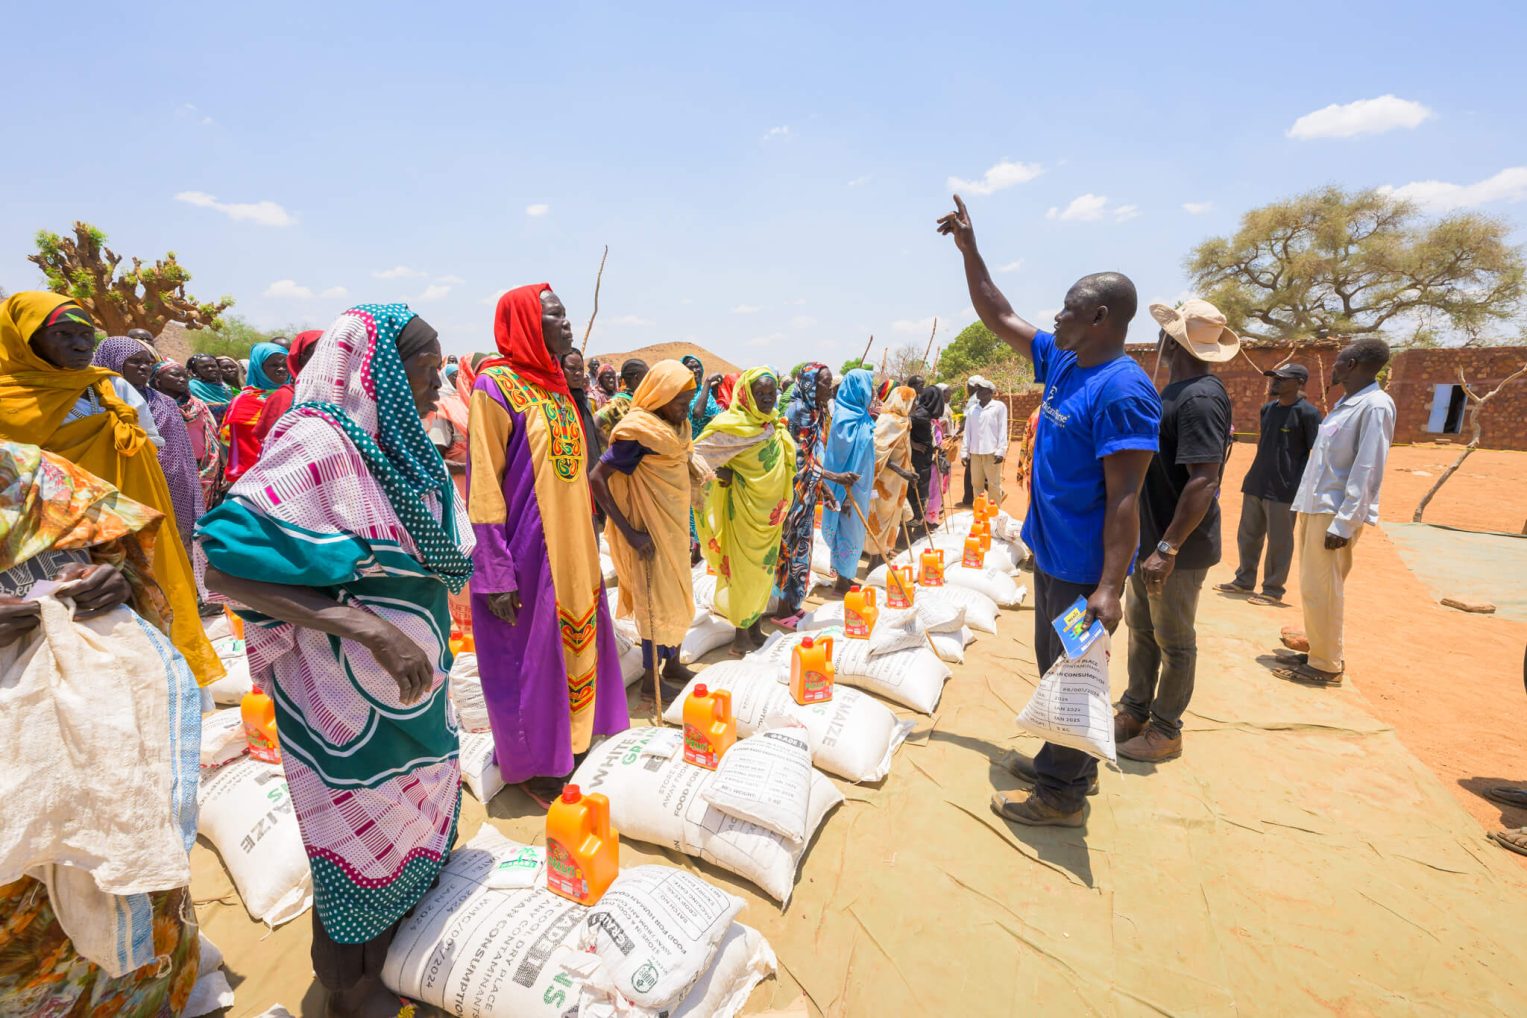 Our essential food aid helps displaced families in the remote Kordofan region survive the lean season.